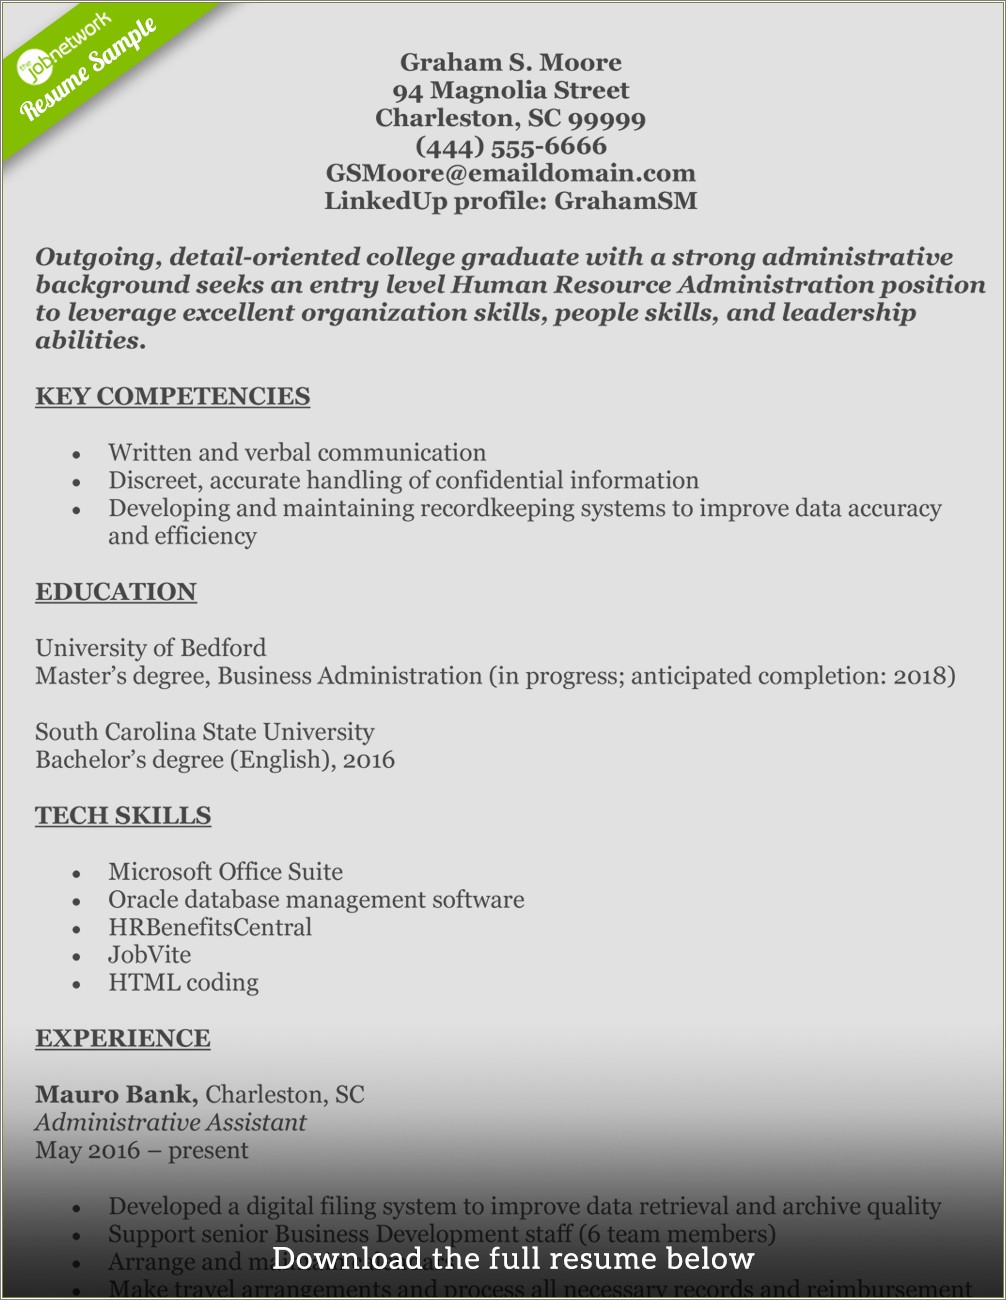 Resume Skills For A Human Resources Assistant